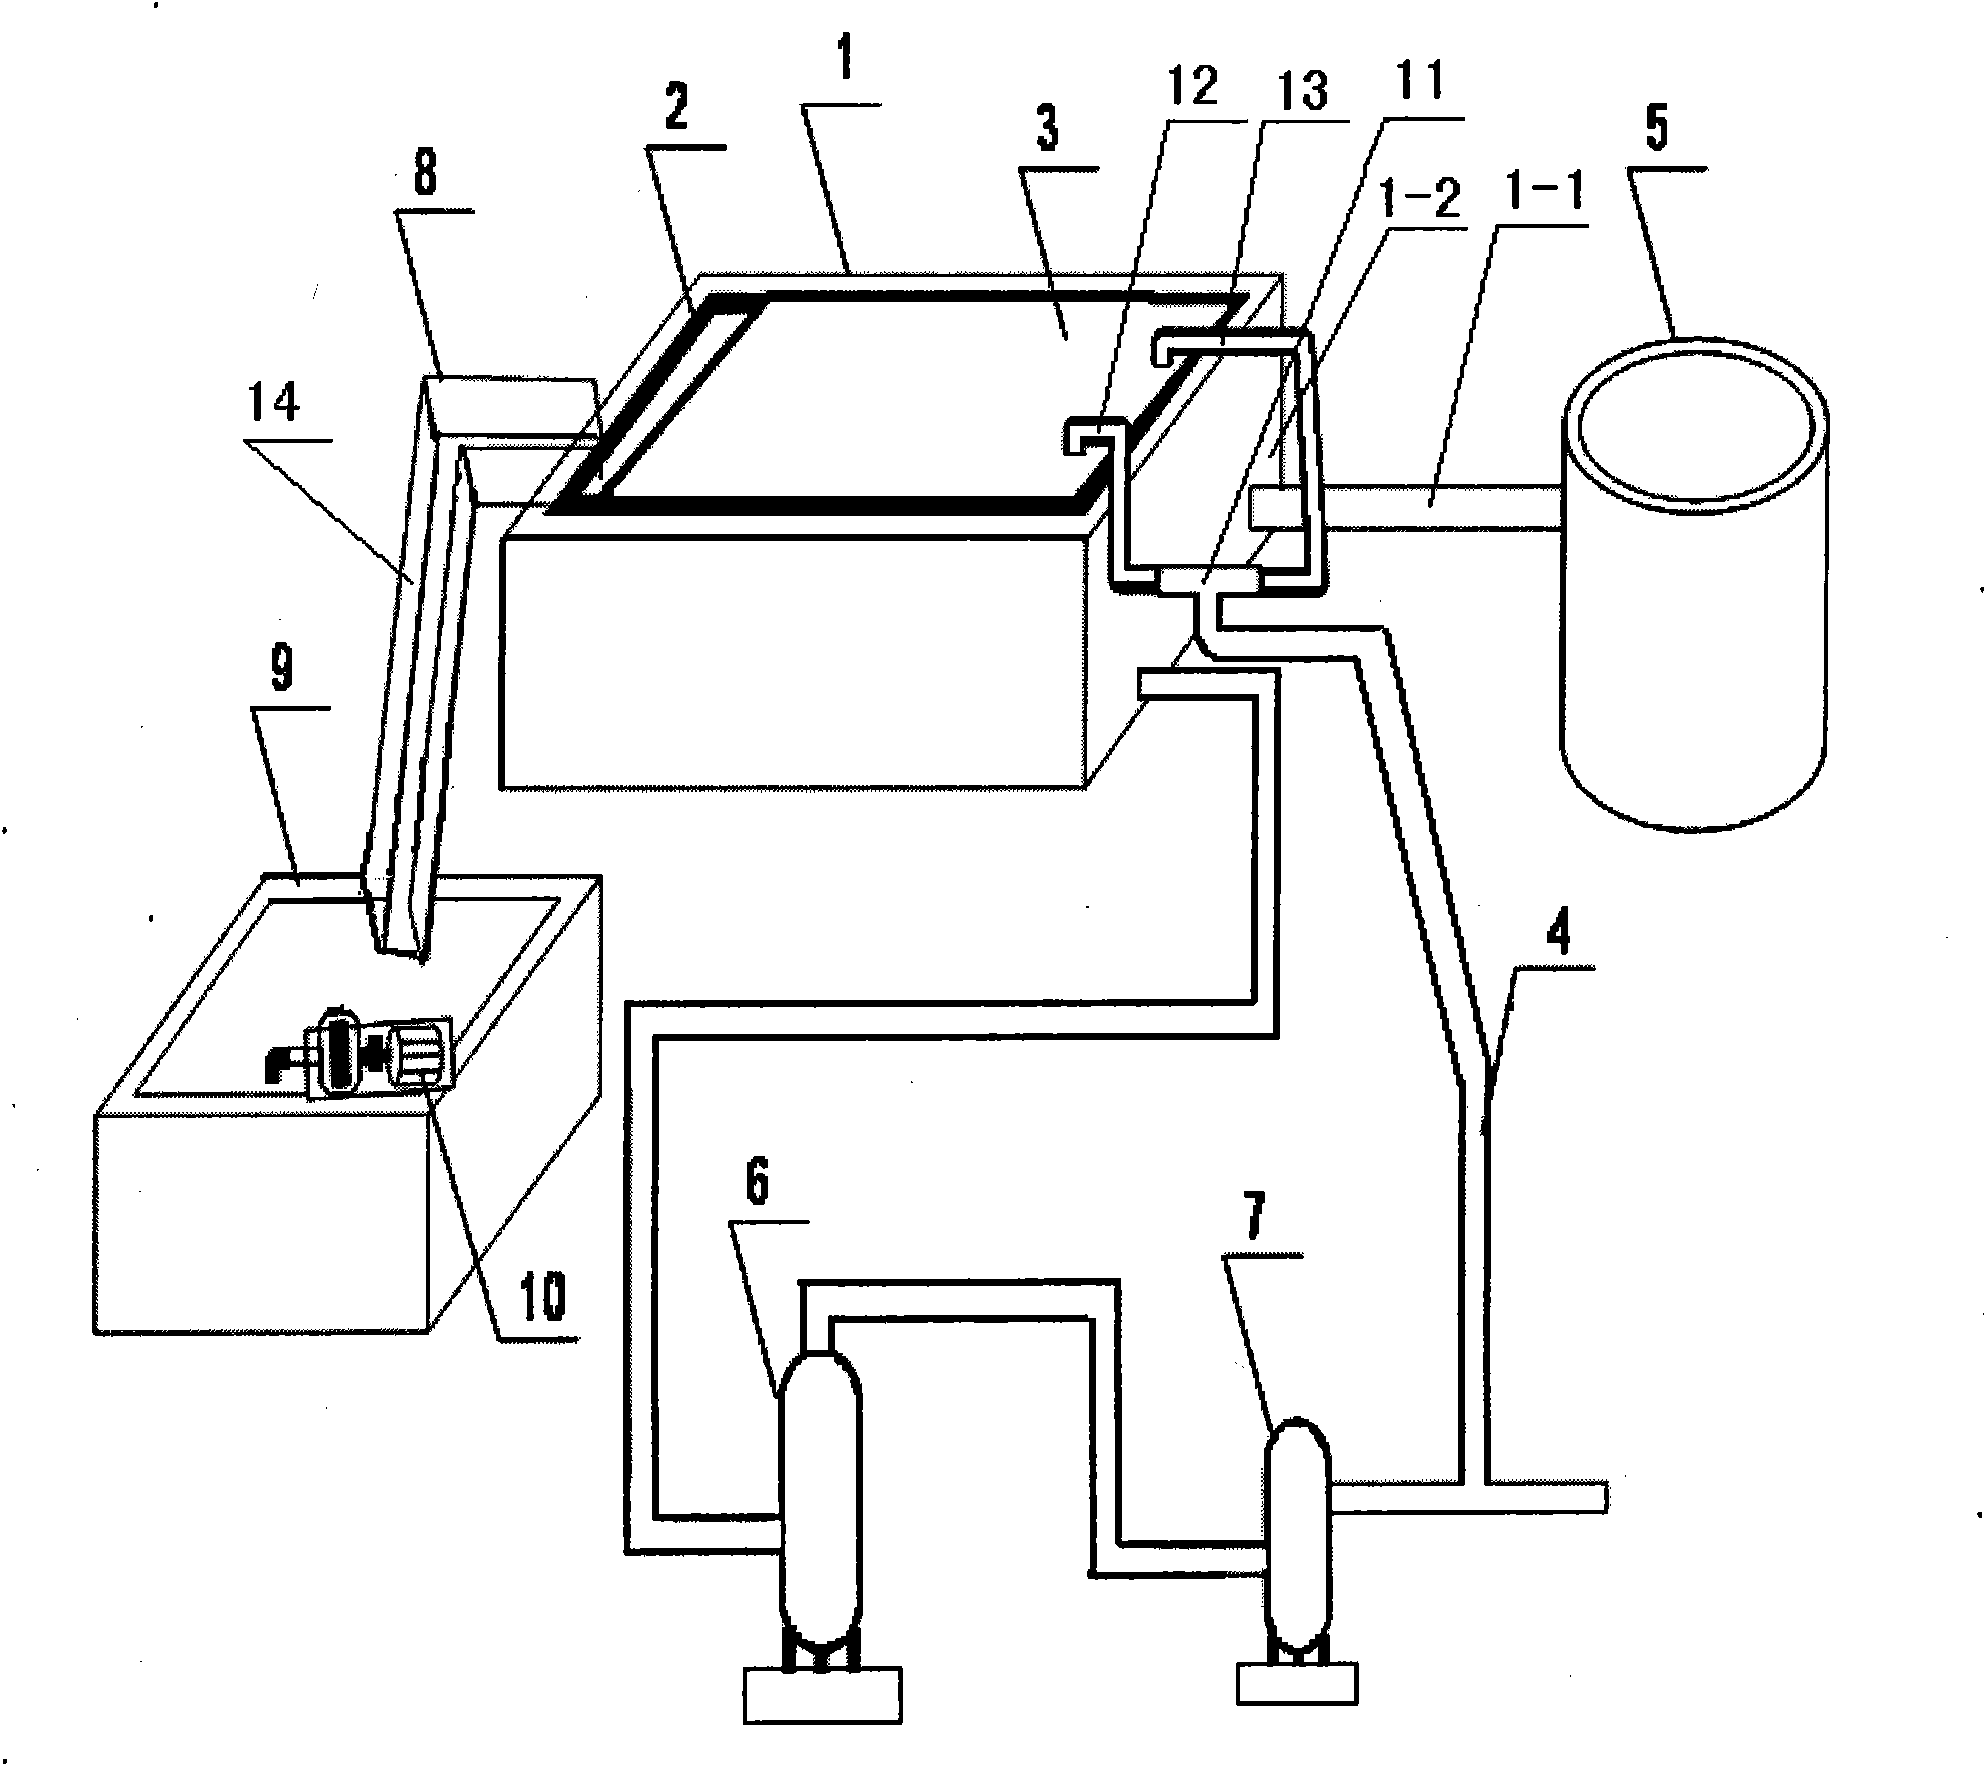 Closed flotation system with dross blowing device